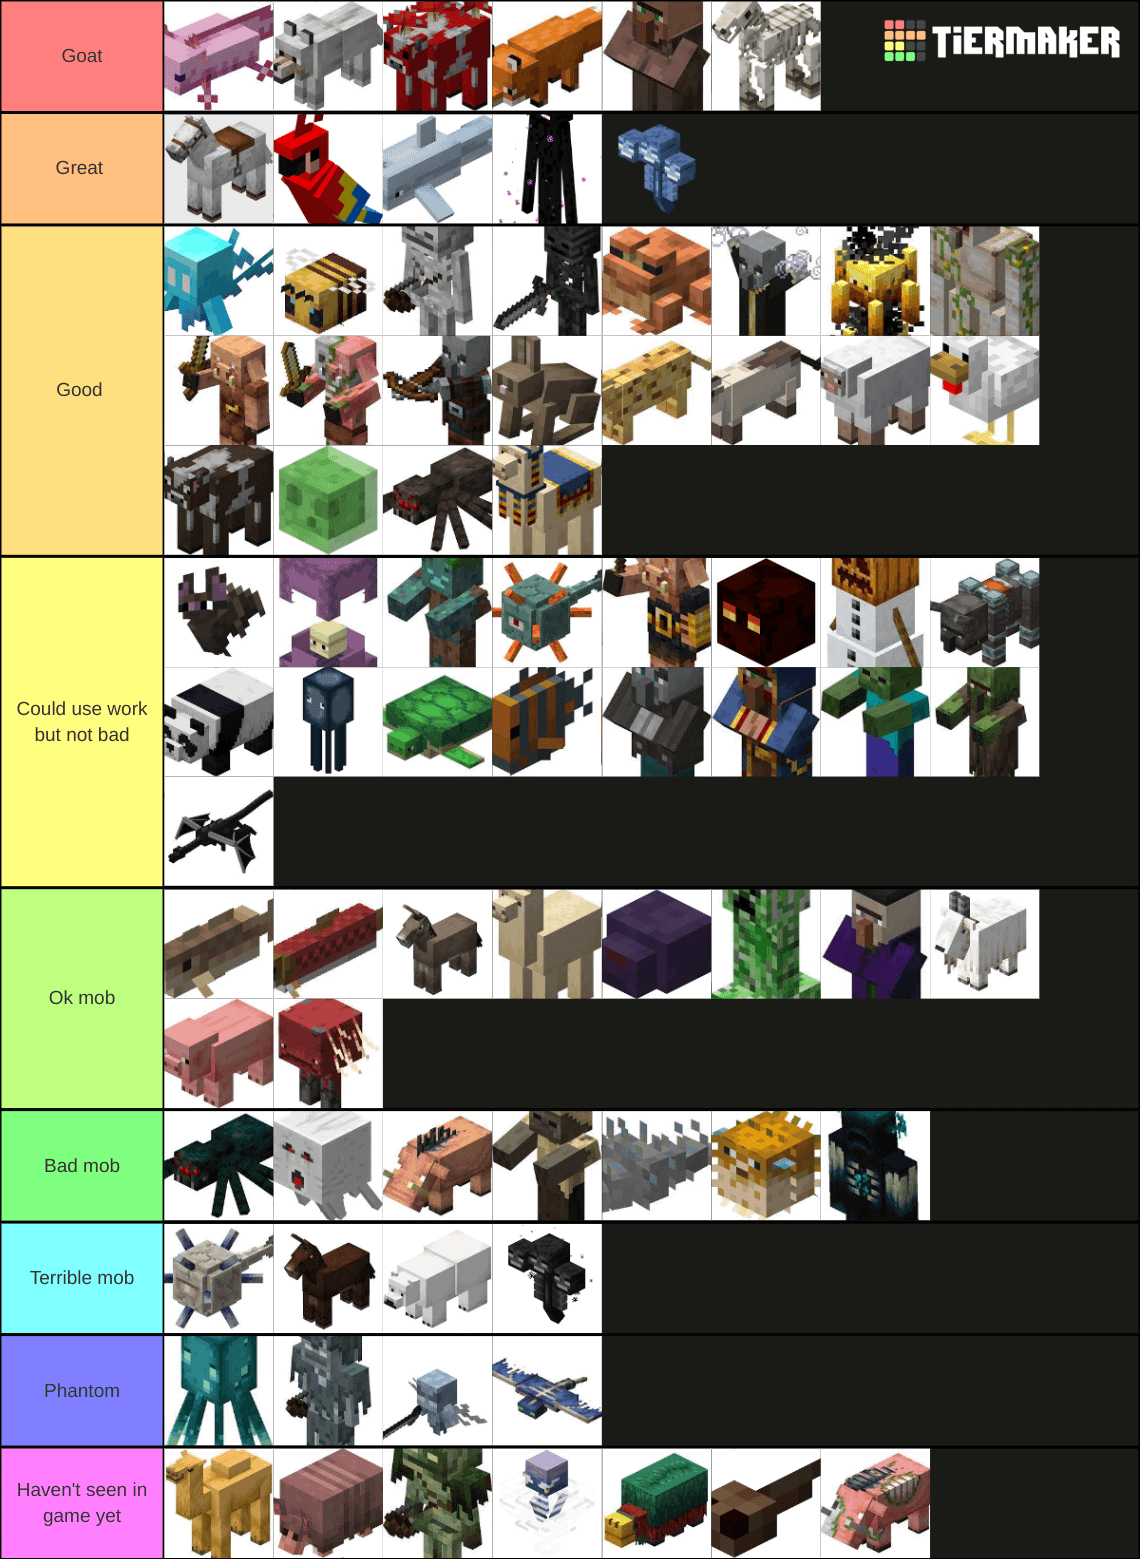 Minecraft Memes - Spice levels reaching max: Minecraft mob tier list, blue wither = bedrock wither in the mix 🌶️🔥